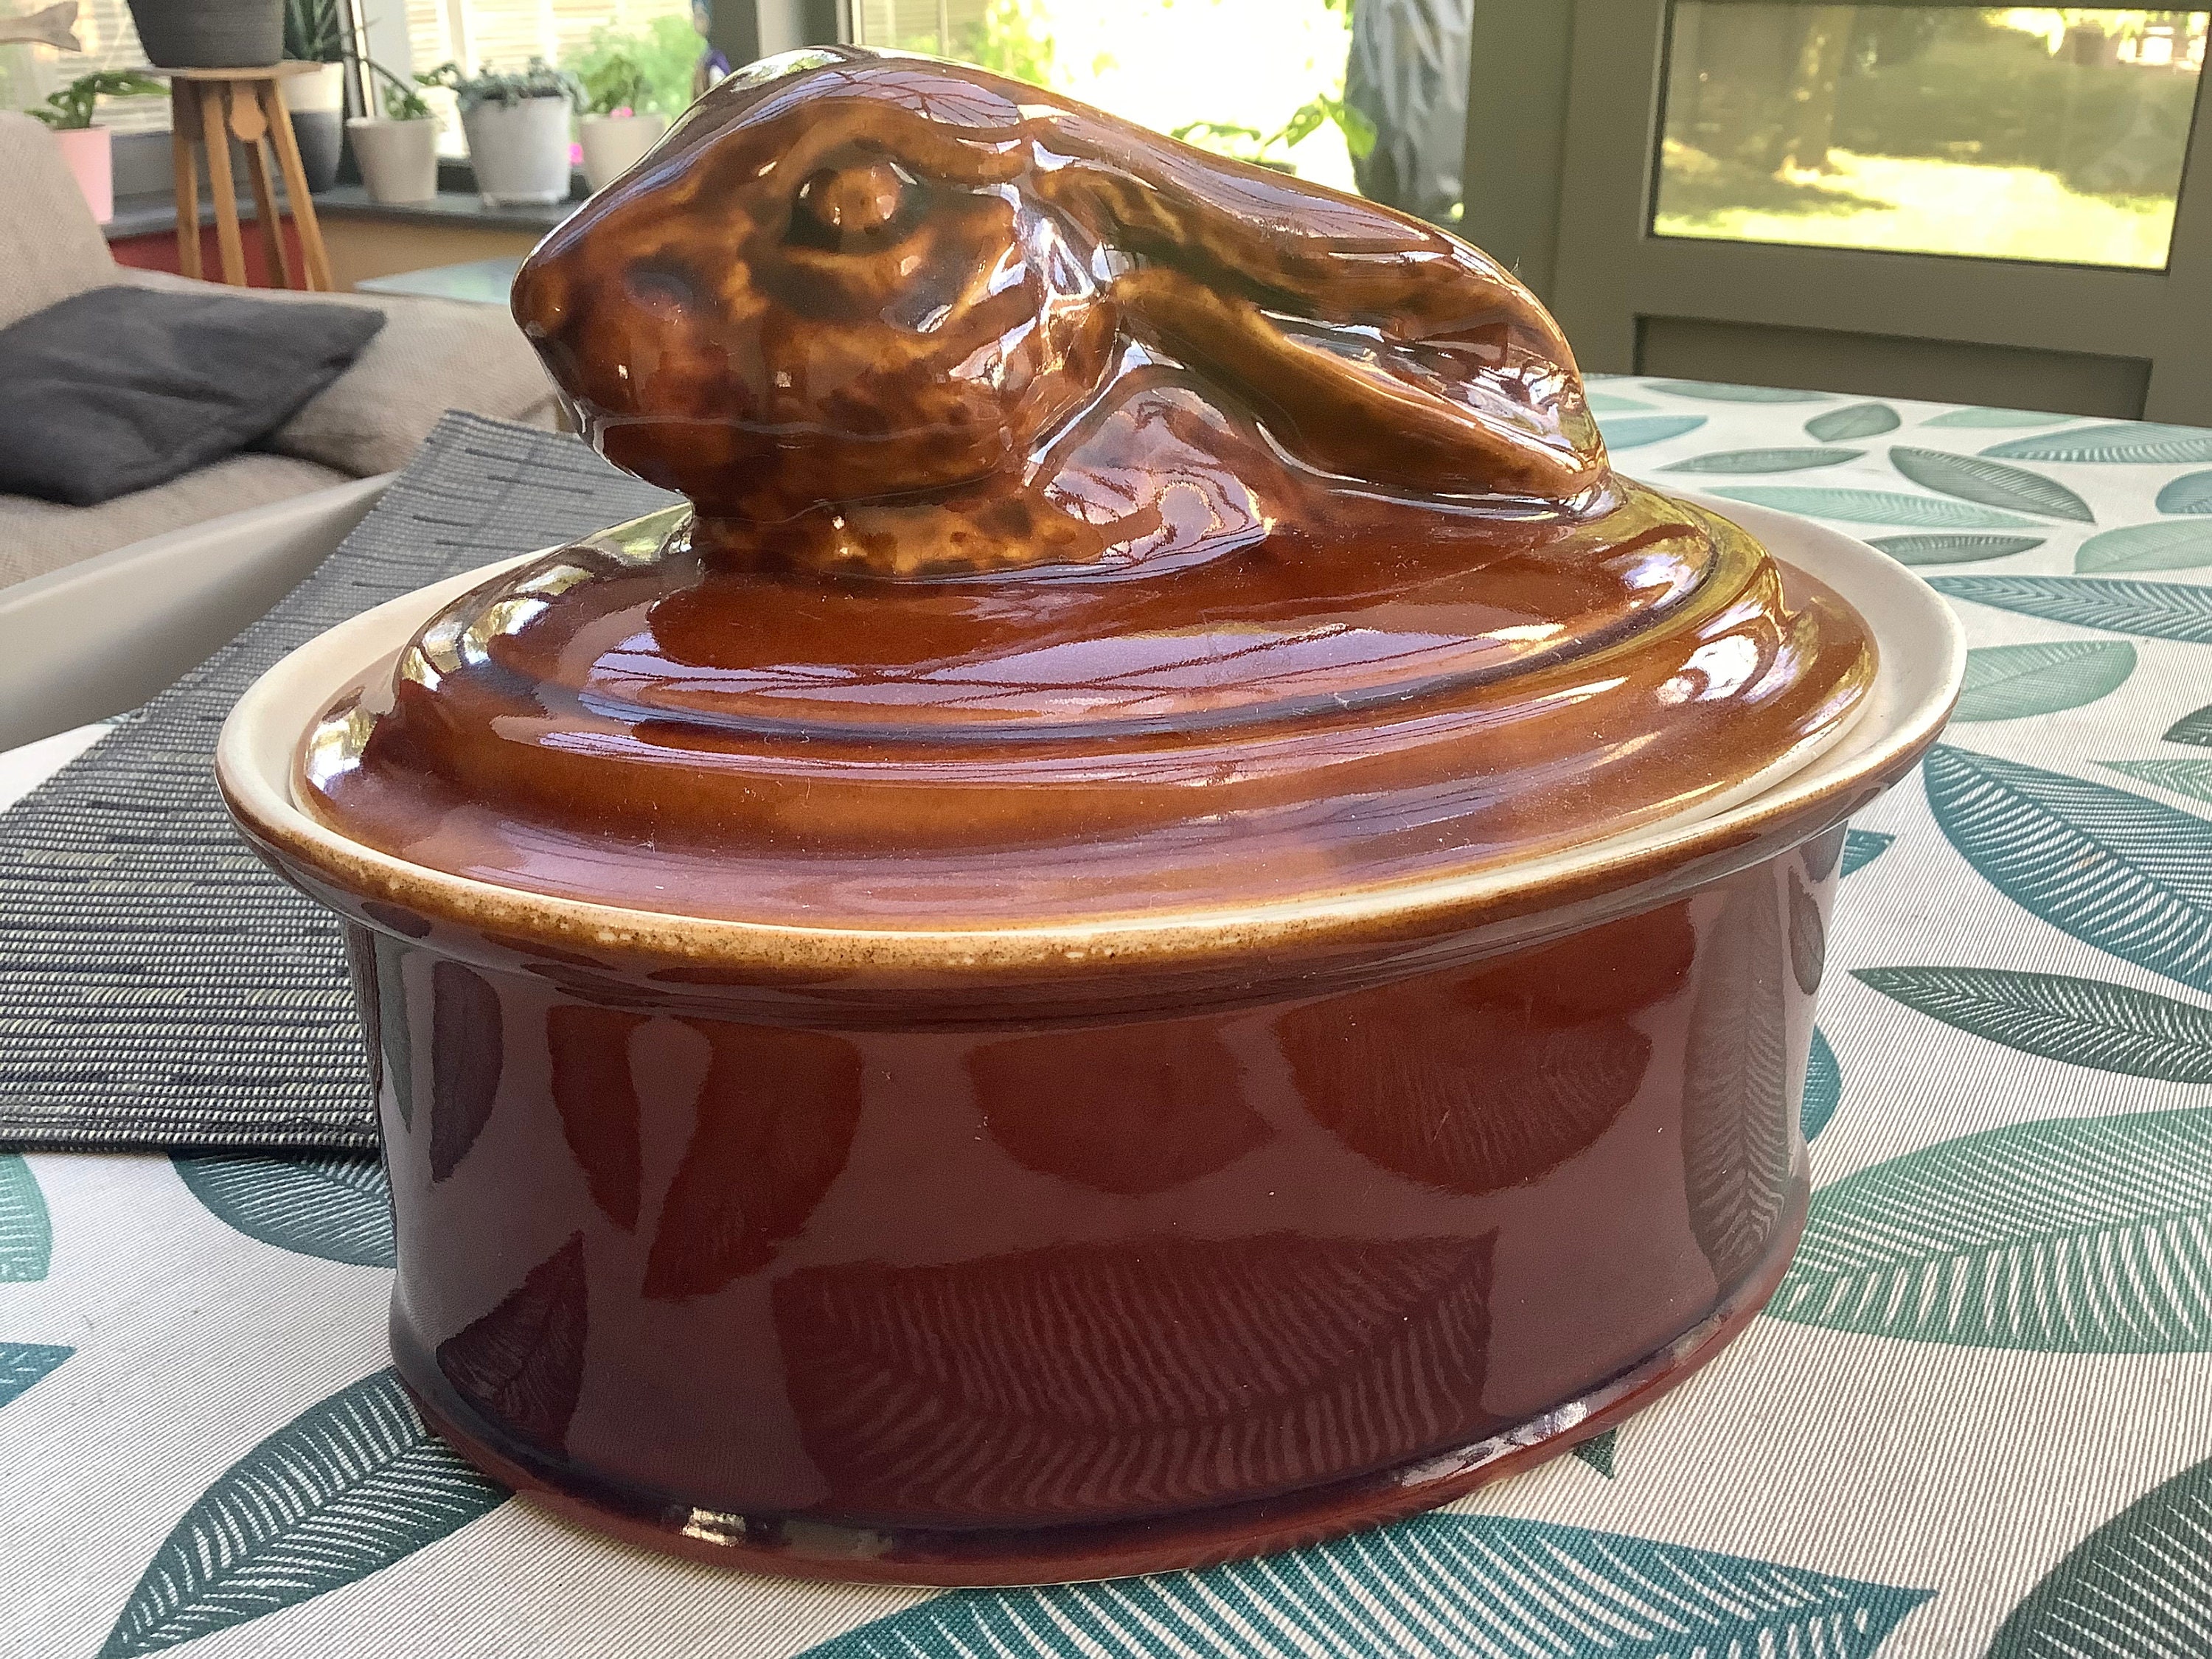 1960s Chasseur France Red Rabbit Hare Enameled Cast Iron Pate Terrine Mold